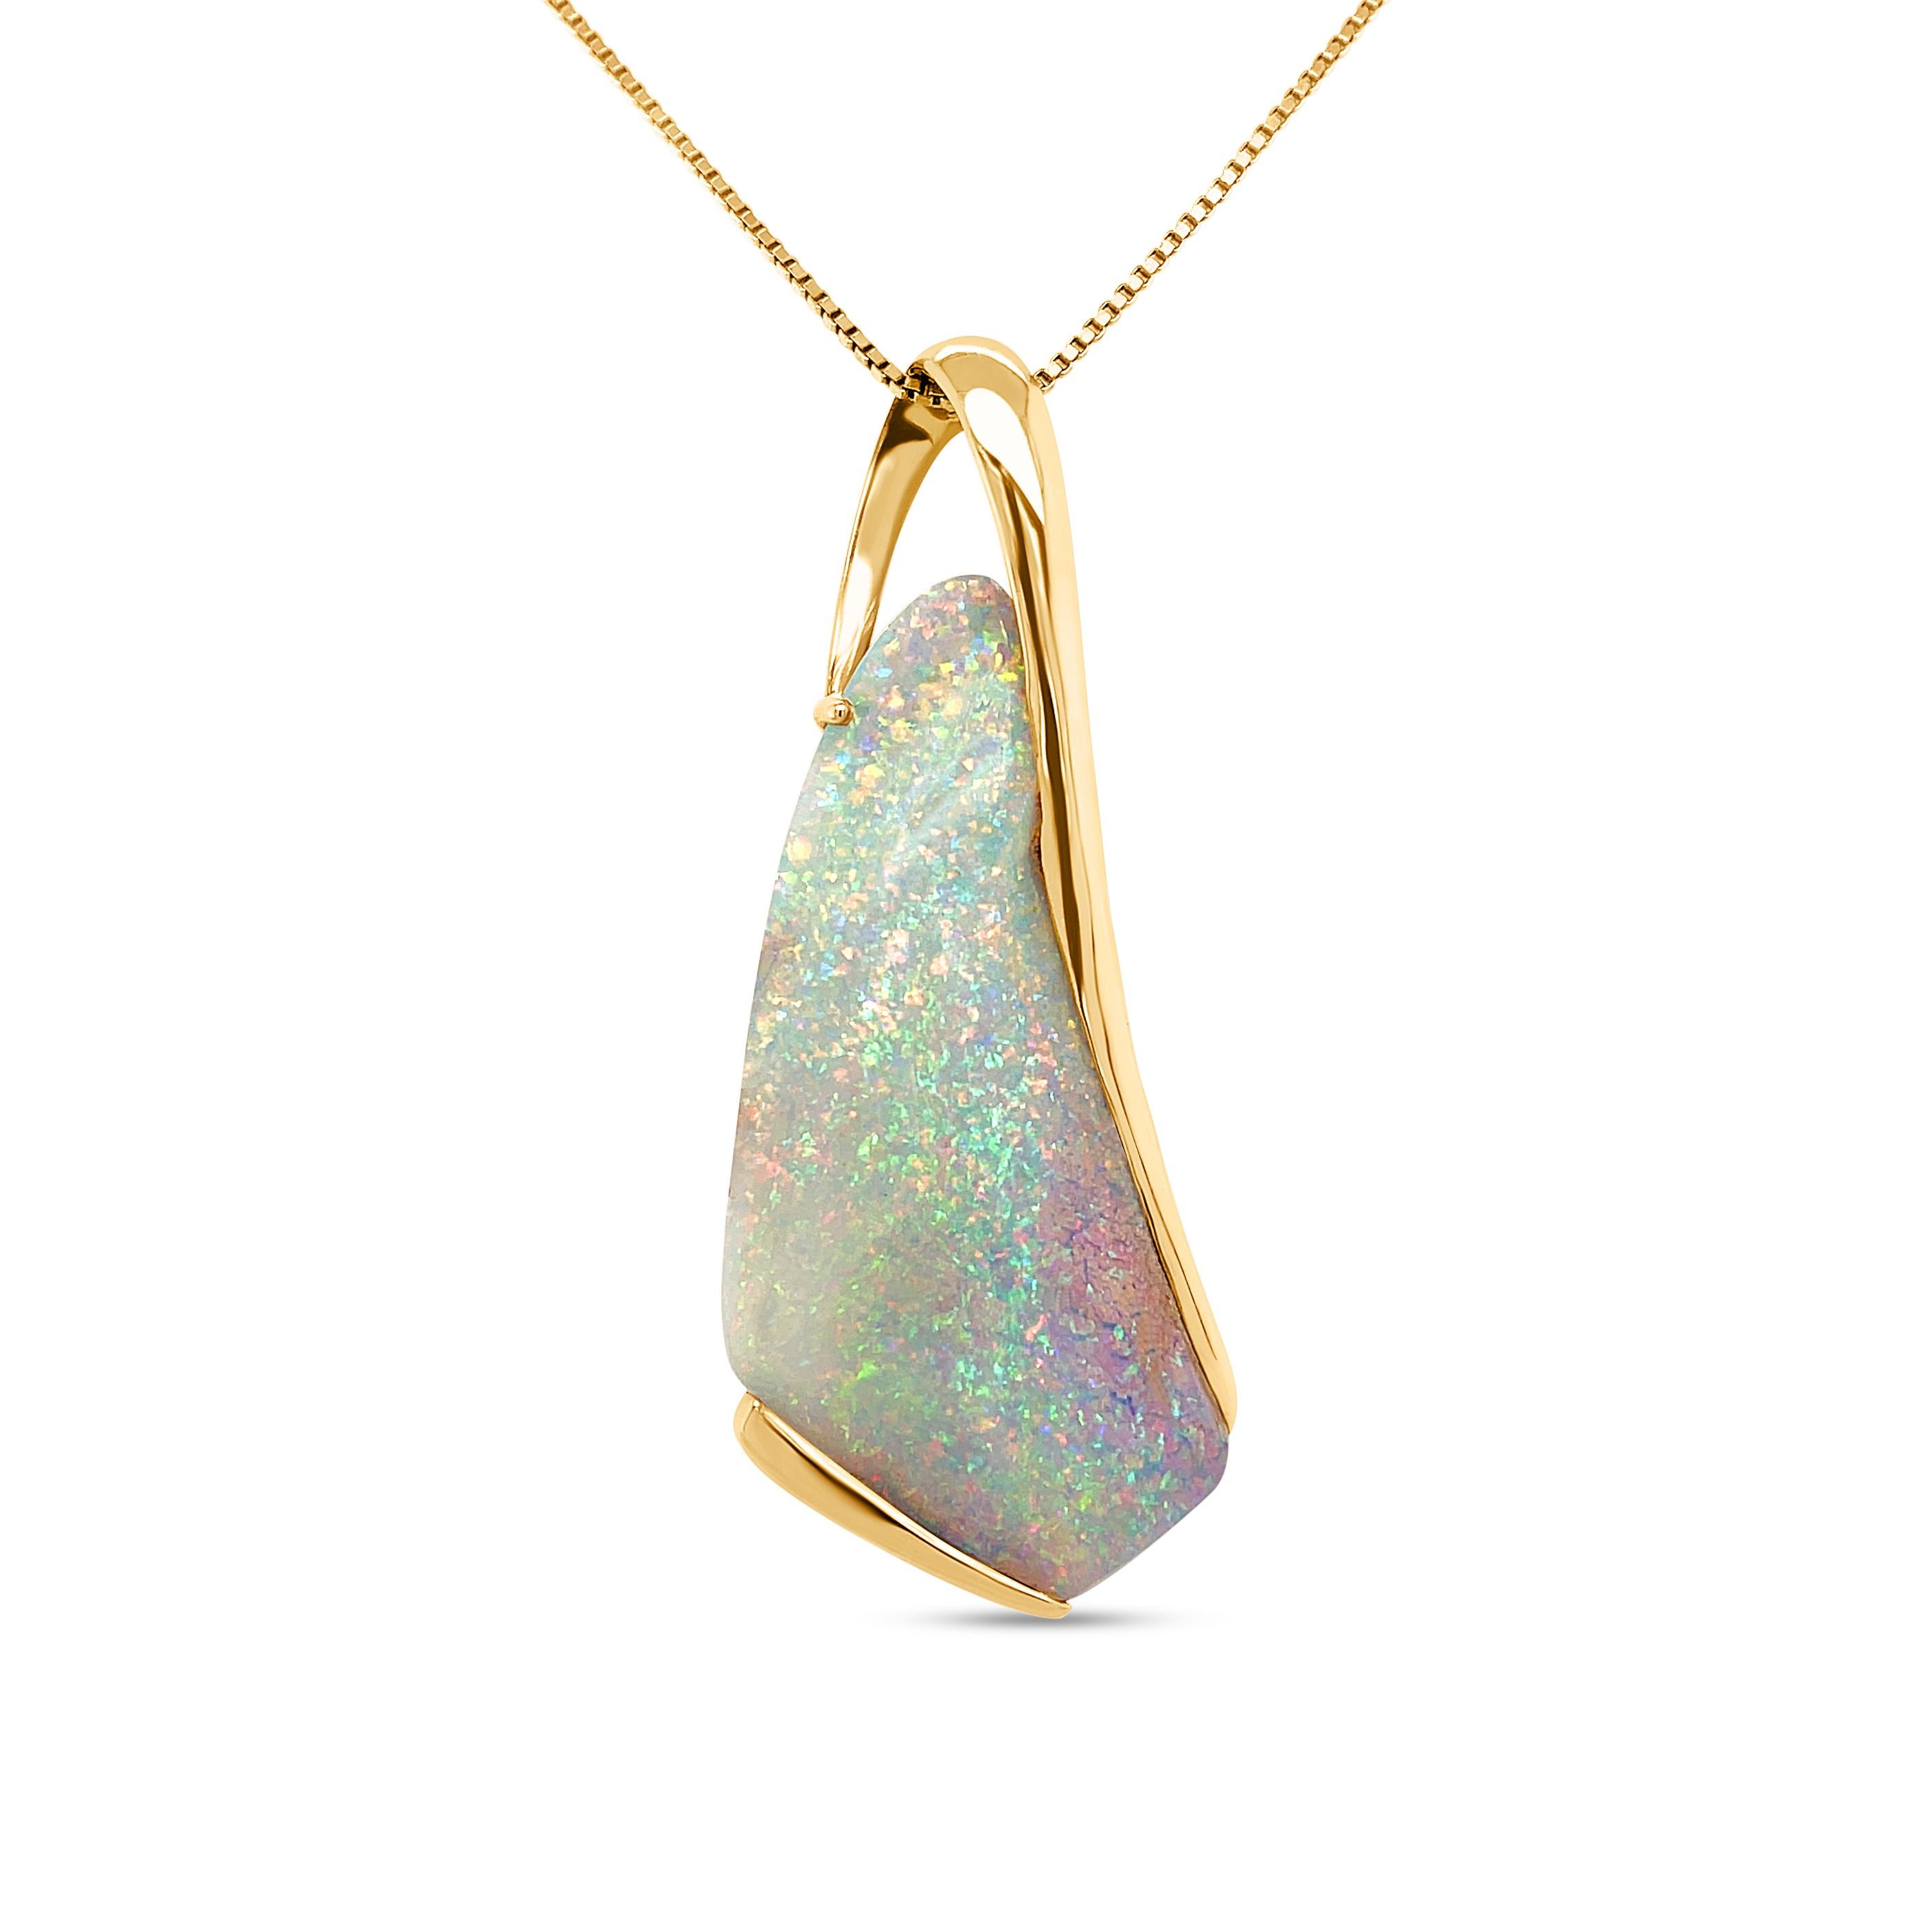 The white-blues and sparkling silvers of wintry dreams swirl in this dreamy boulder opal pendant (32.73ct) skillfully set in 18K yellow gold. The ‘Winter Blossom’ pendant is a divine piece designed to accentuate the grace and ephemeral beauty of the